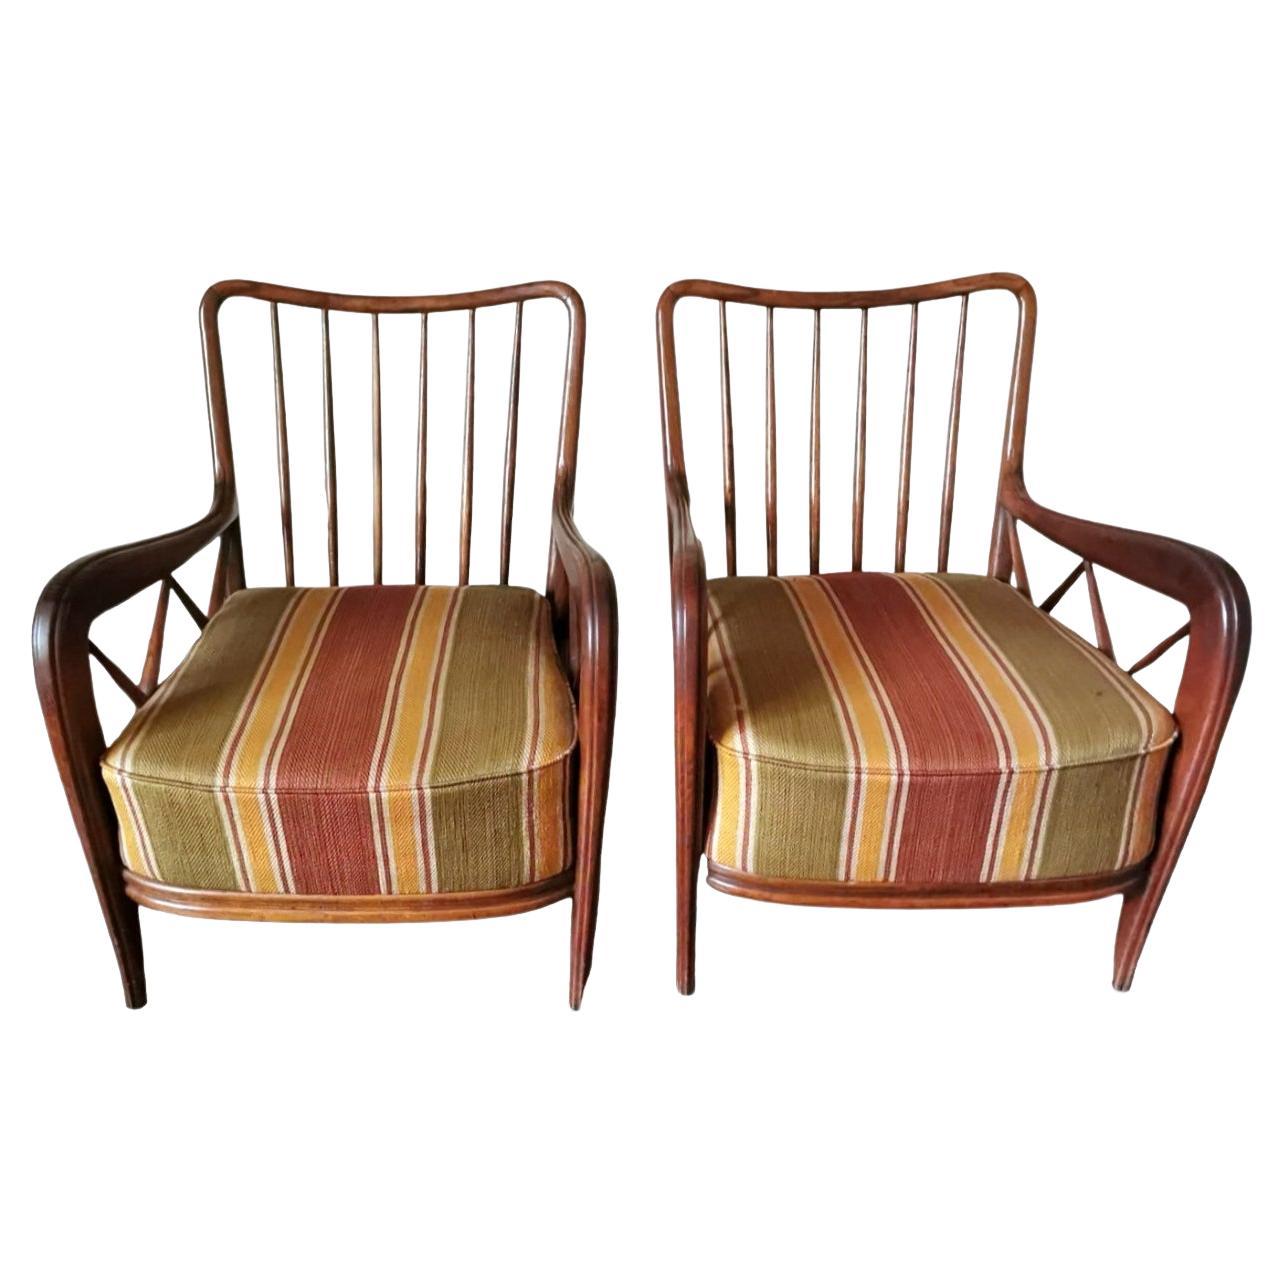 Paolo Buffa Design Pair Of Italian Wooden Armchairs Upholstered Fabric Cushions